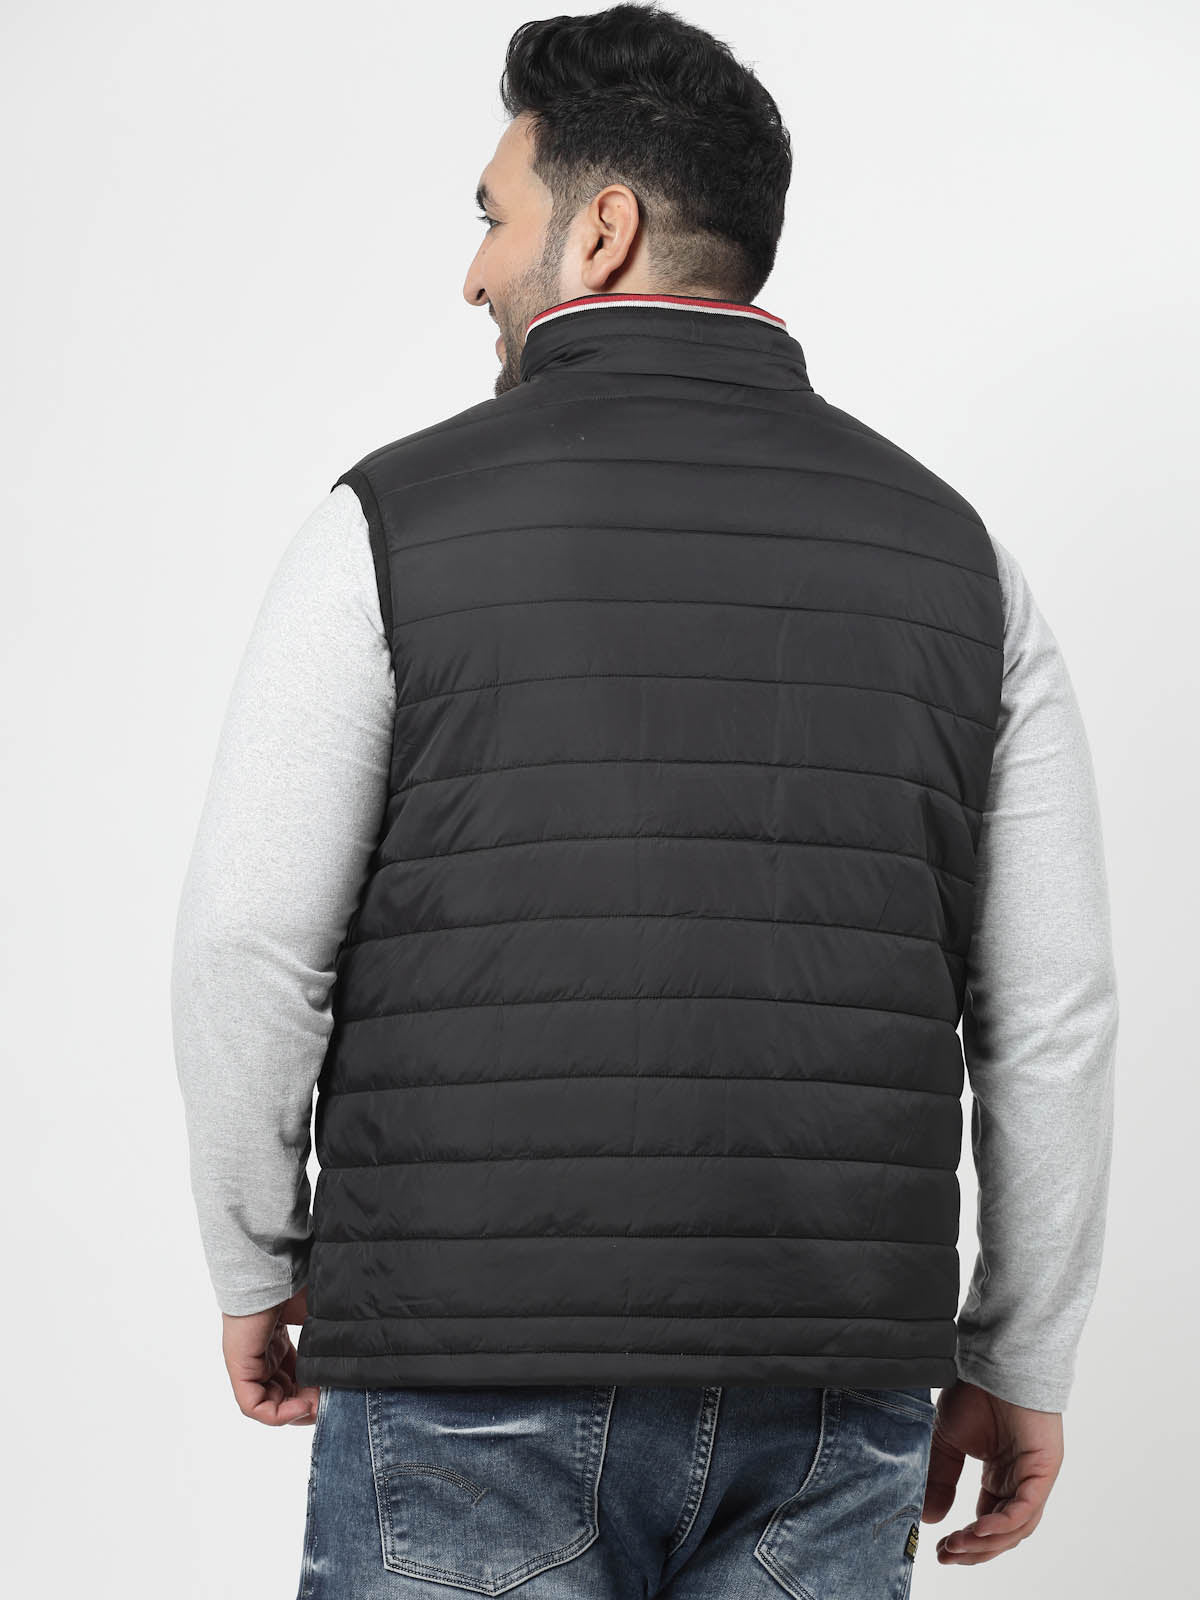 Limited Offer Deal Louis Vuitton Leather Accent Sleeveless Puffer Jacket,  louis vuitton puffer vest